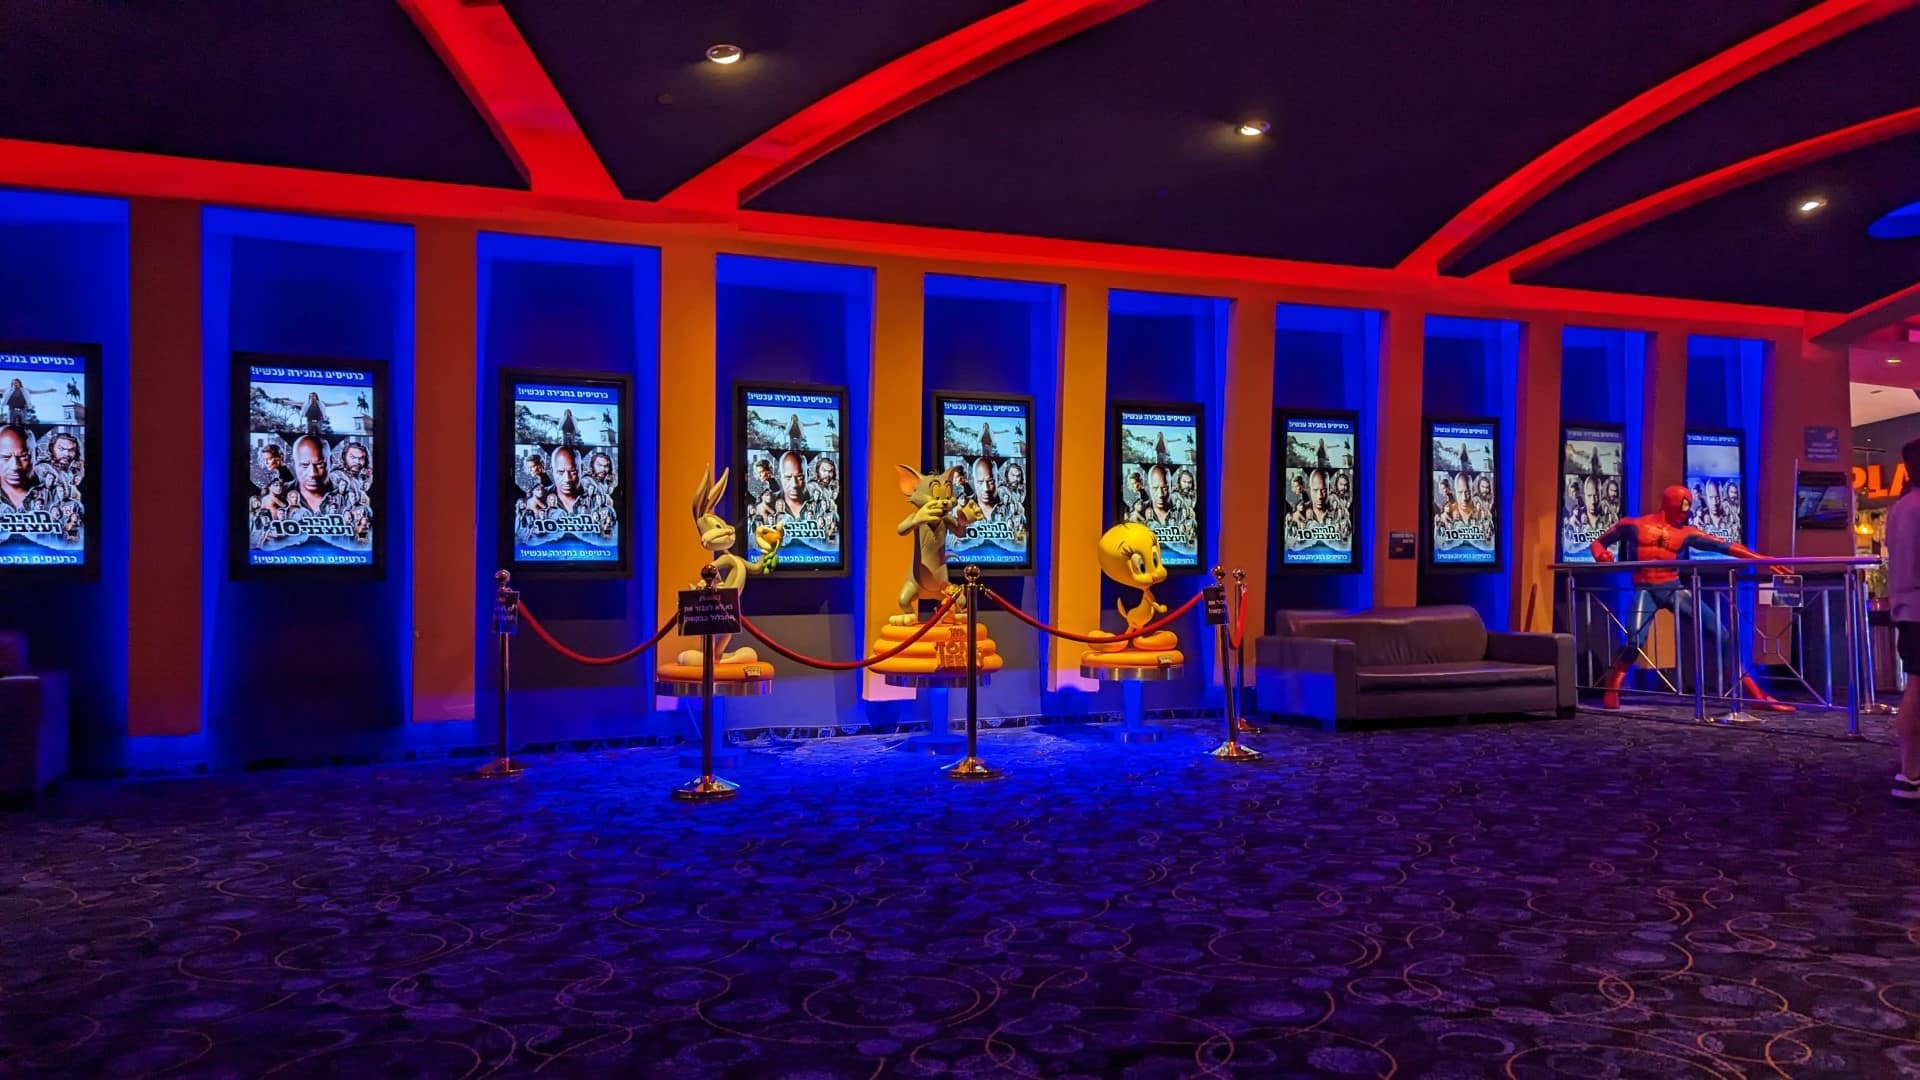 A movie theater with a large number of screens.